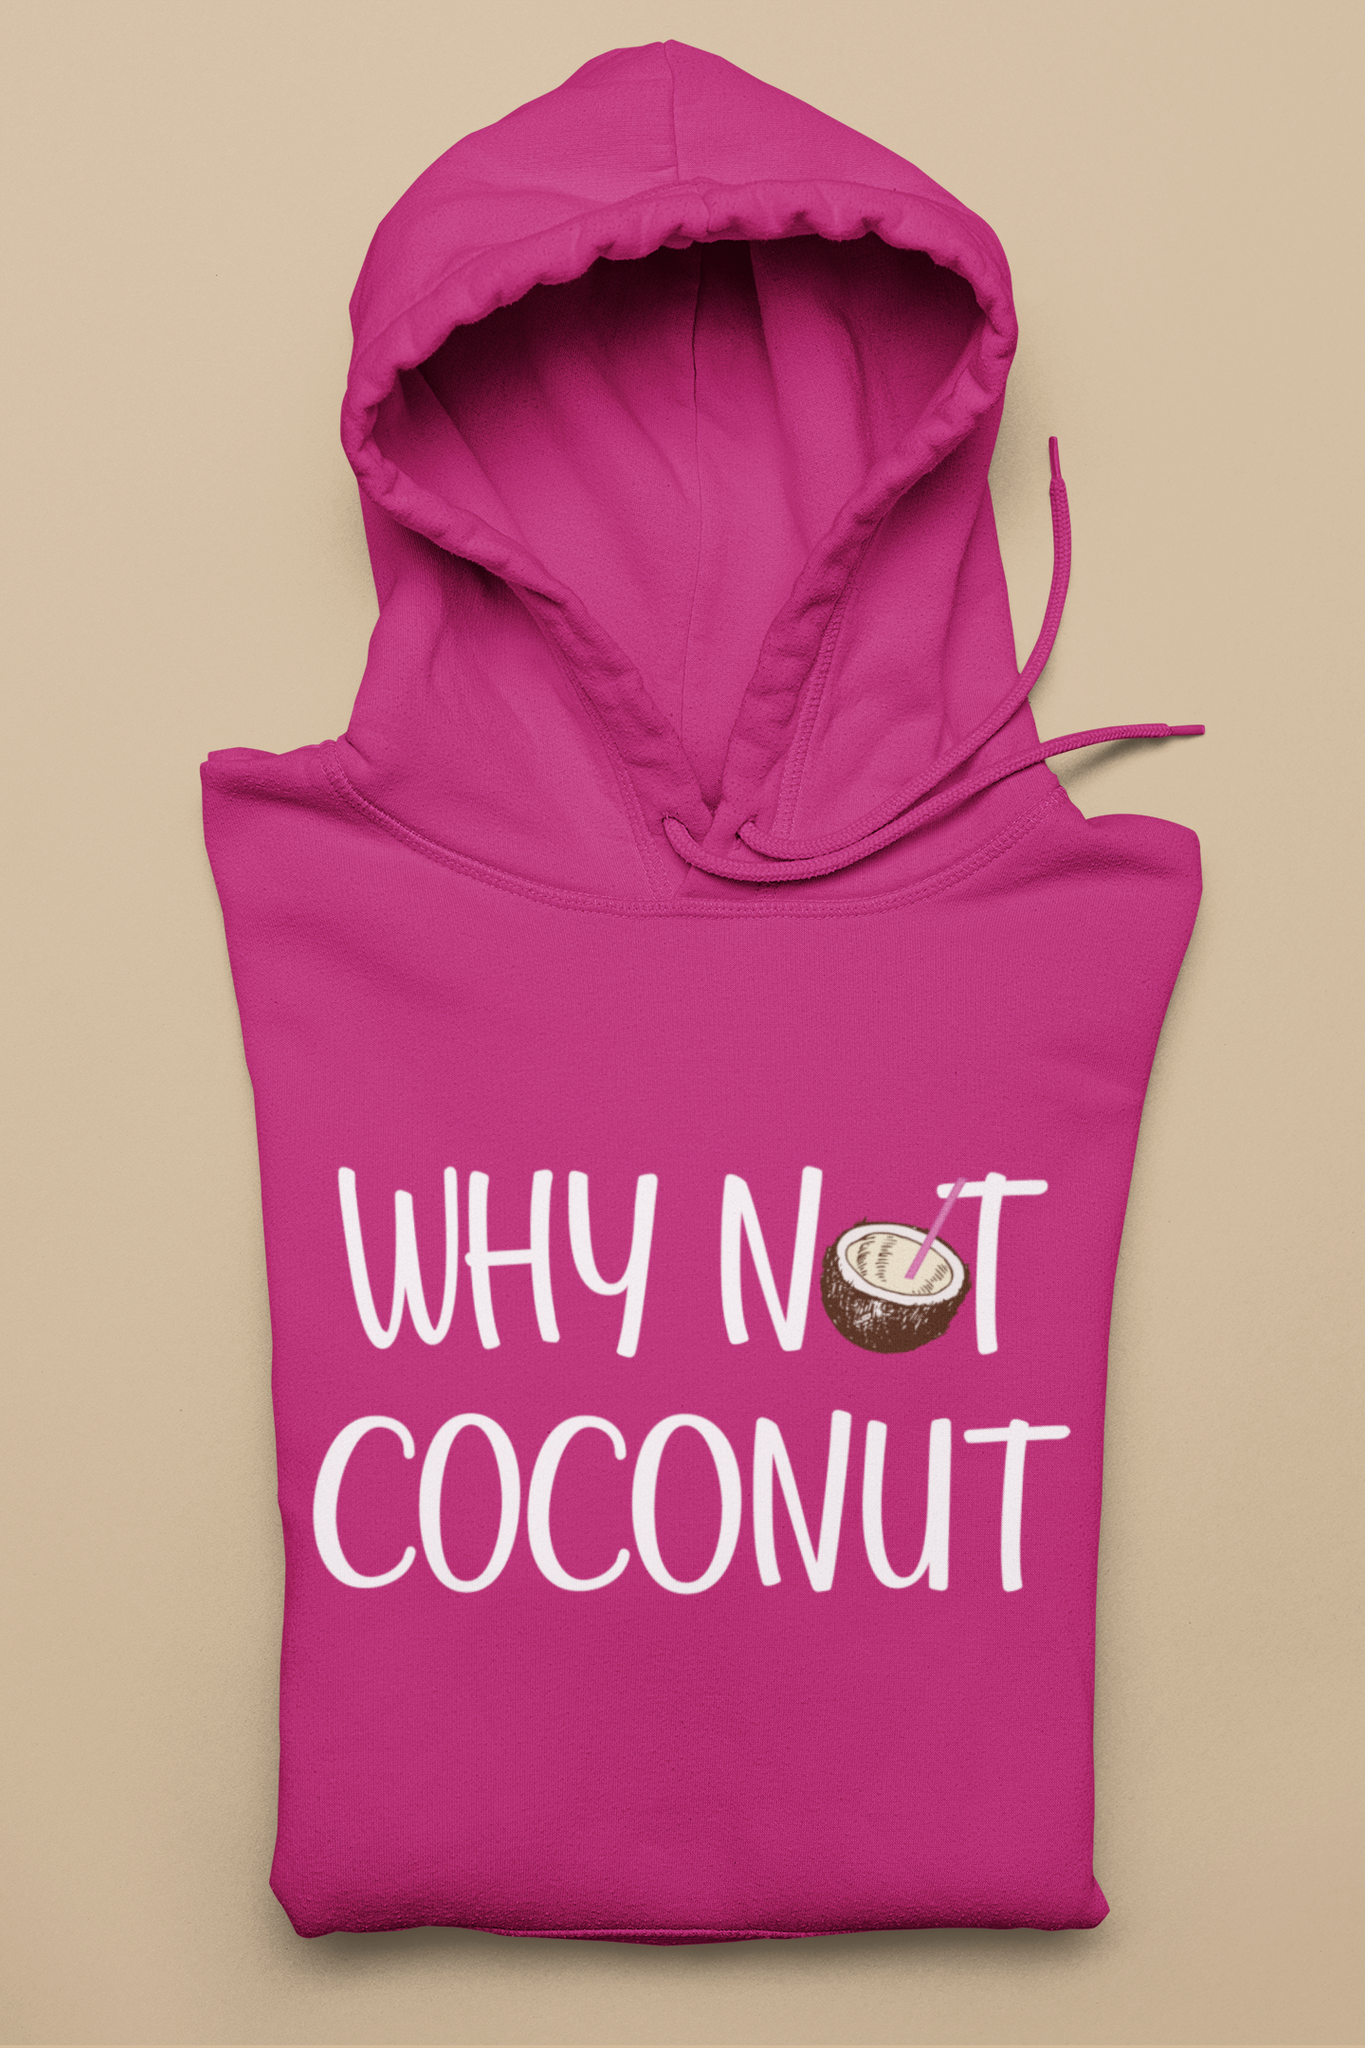 Kangourou - Why not coconut